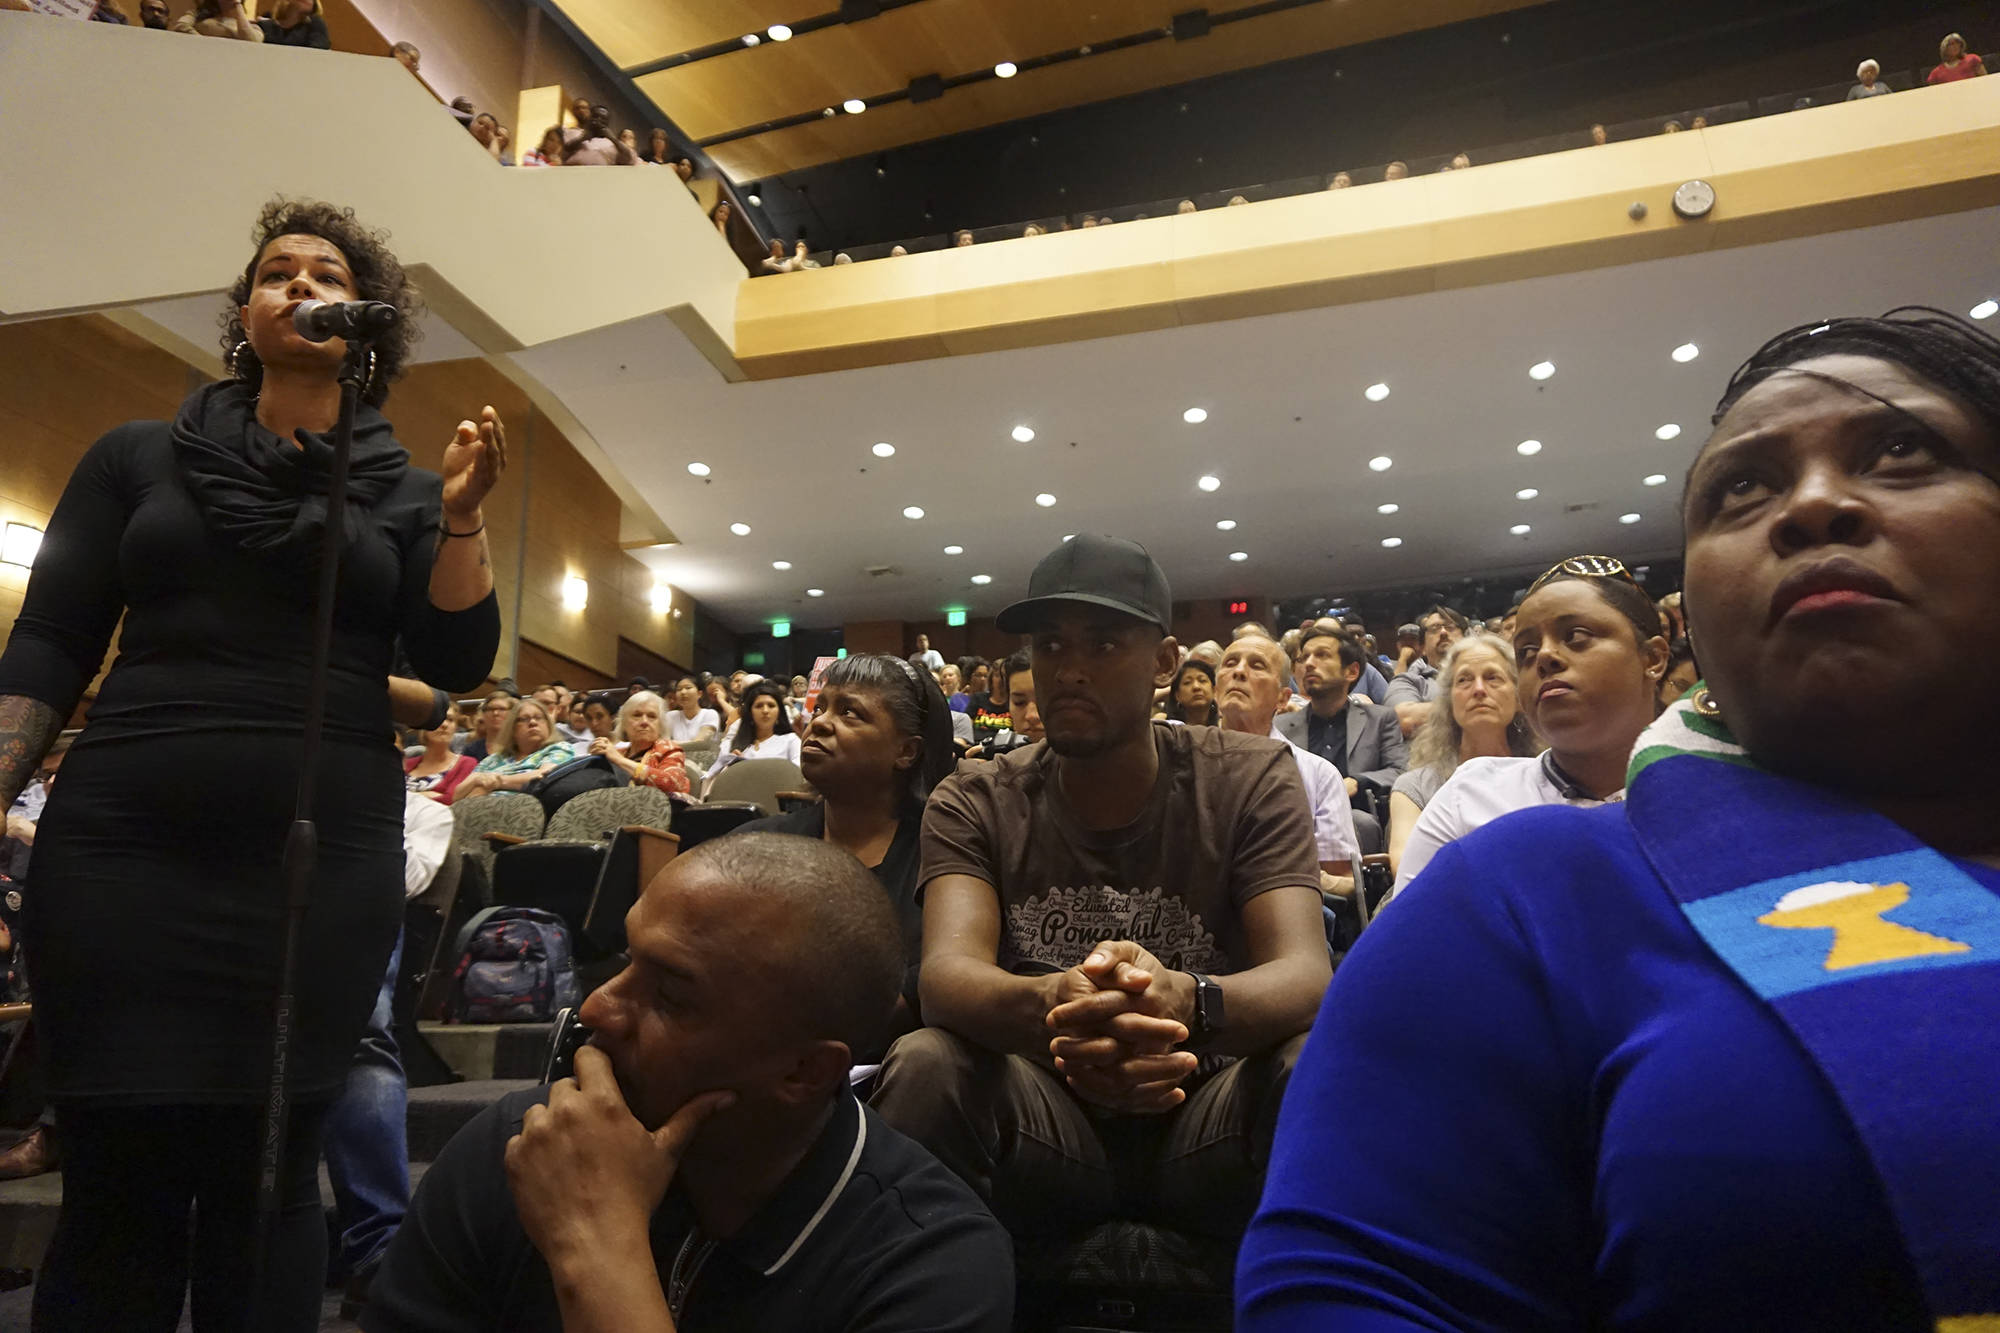 Nikkita Oliver, left, addresses the council during the June 27 hearing on the police killing of Charleena Lyles. Rev. Brown, right in blue, opened the hearing with a prayer in which she asked God to “make us hear each other. Make us hear the things that we say, and the things that we do not say…We have permission to be angry,” she added. “And let us call our anger righteous, for it is such.” Photo by Casey Jaywork